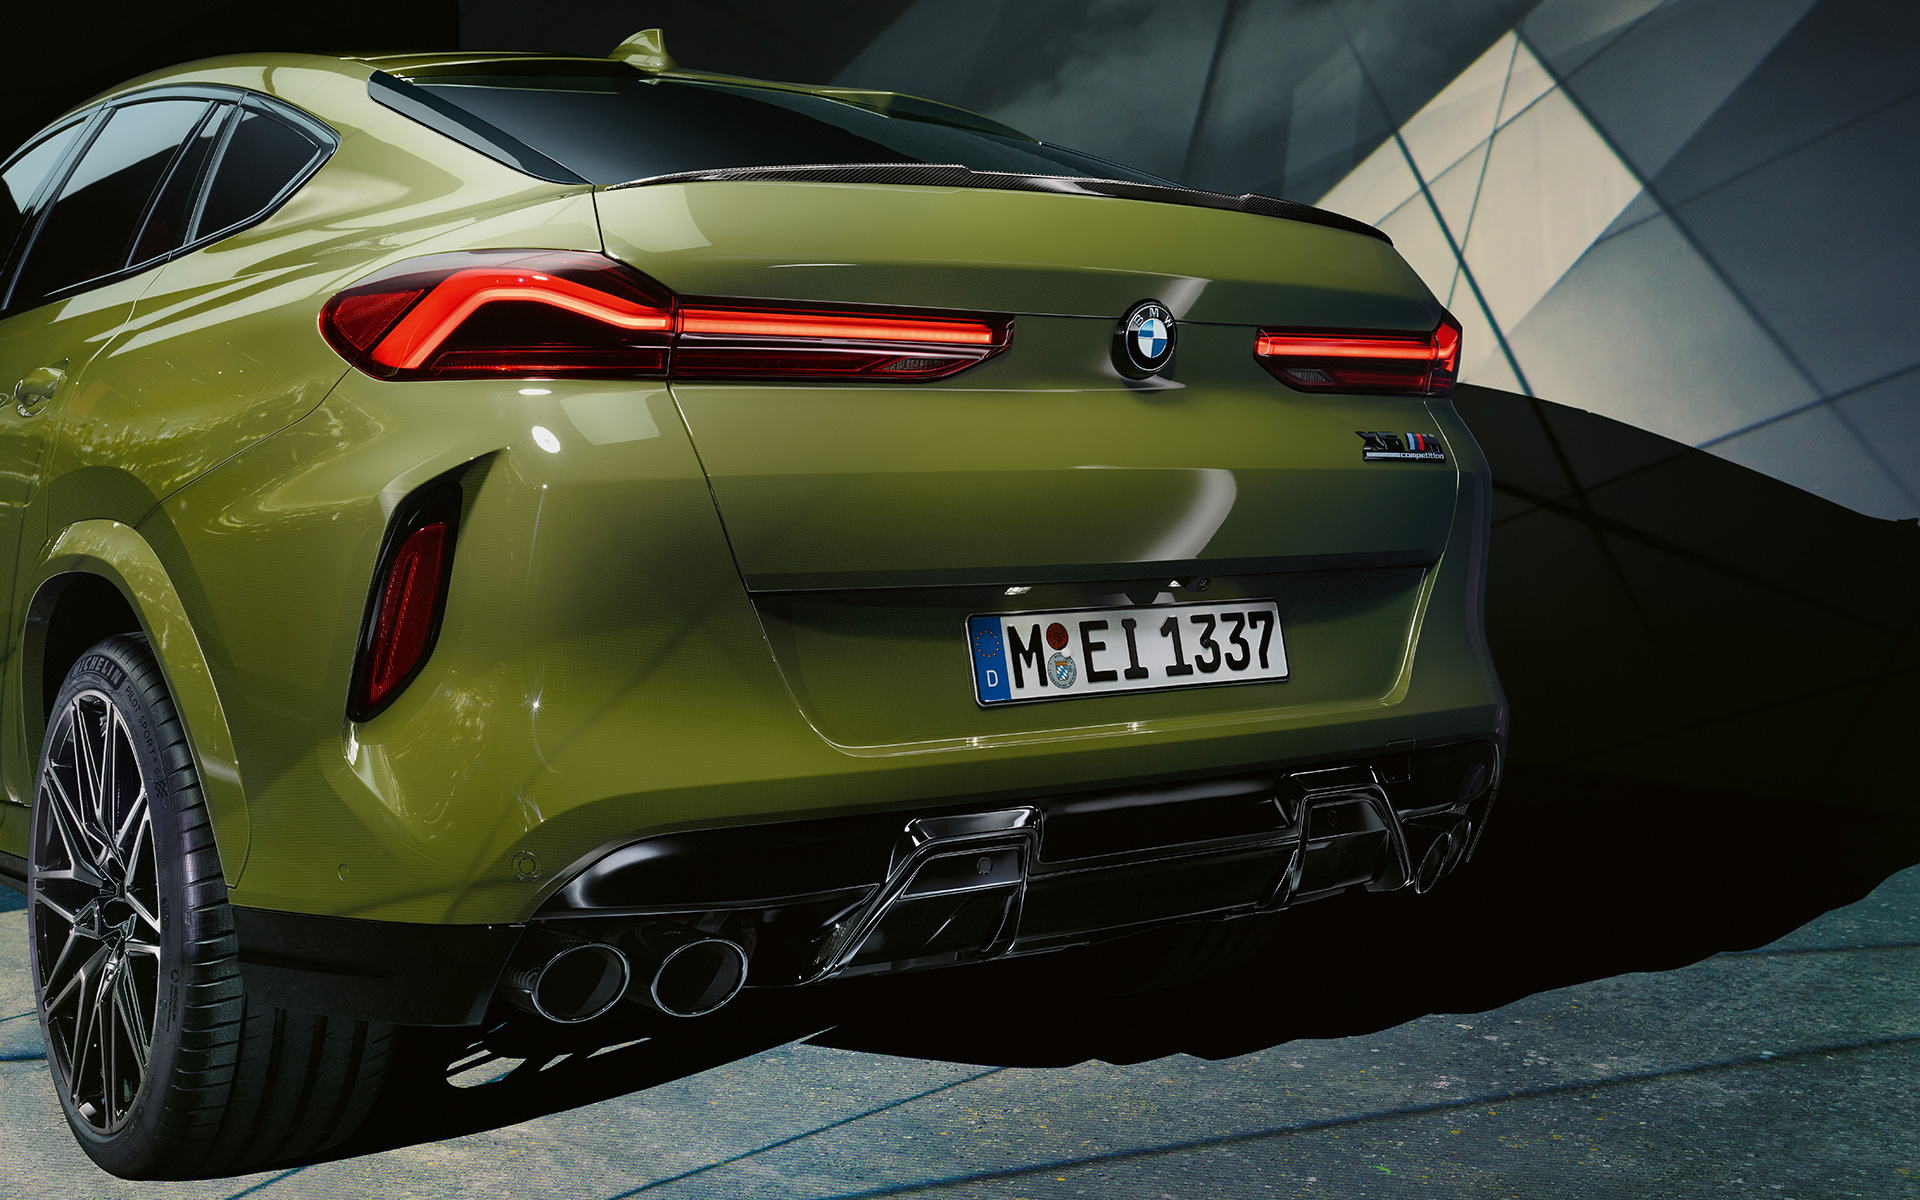 BMW X6 M Competition with M Sport exhaust system F96 2020 SUV BMW Individual Special Paint Urban Green three-quarter close-up rear